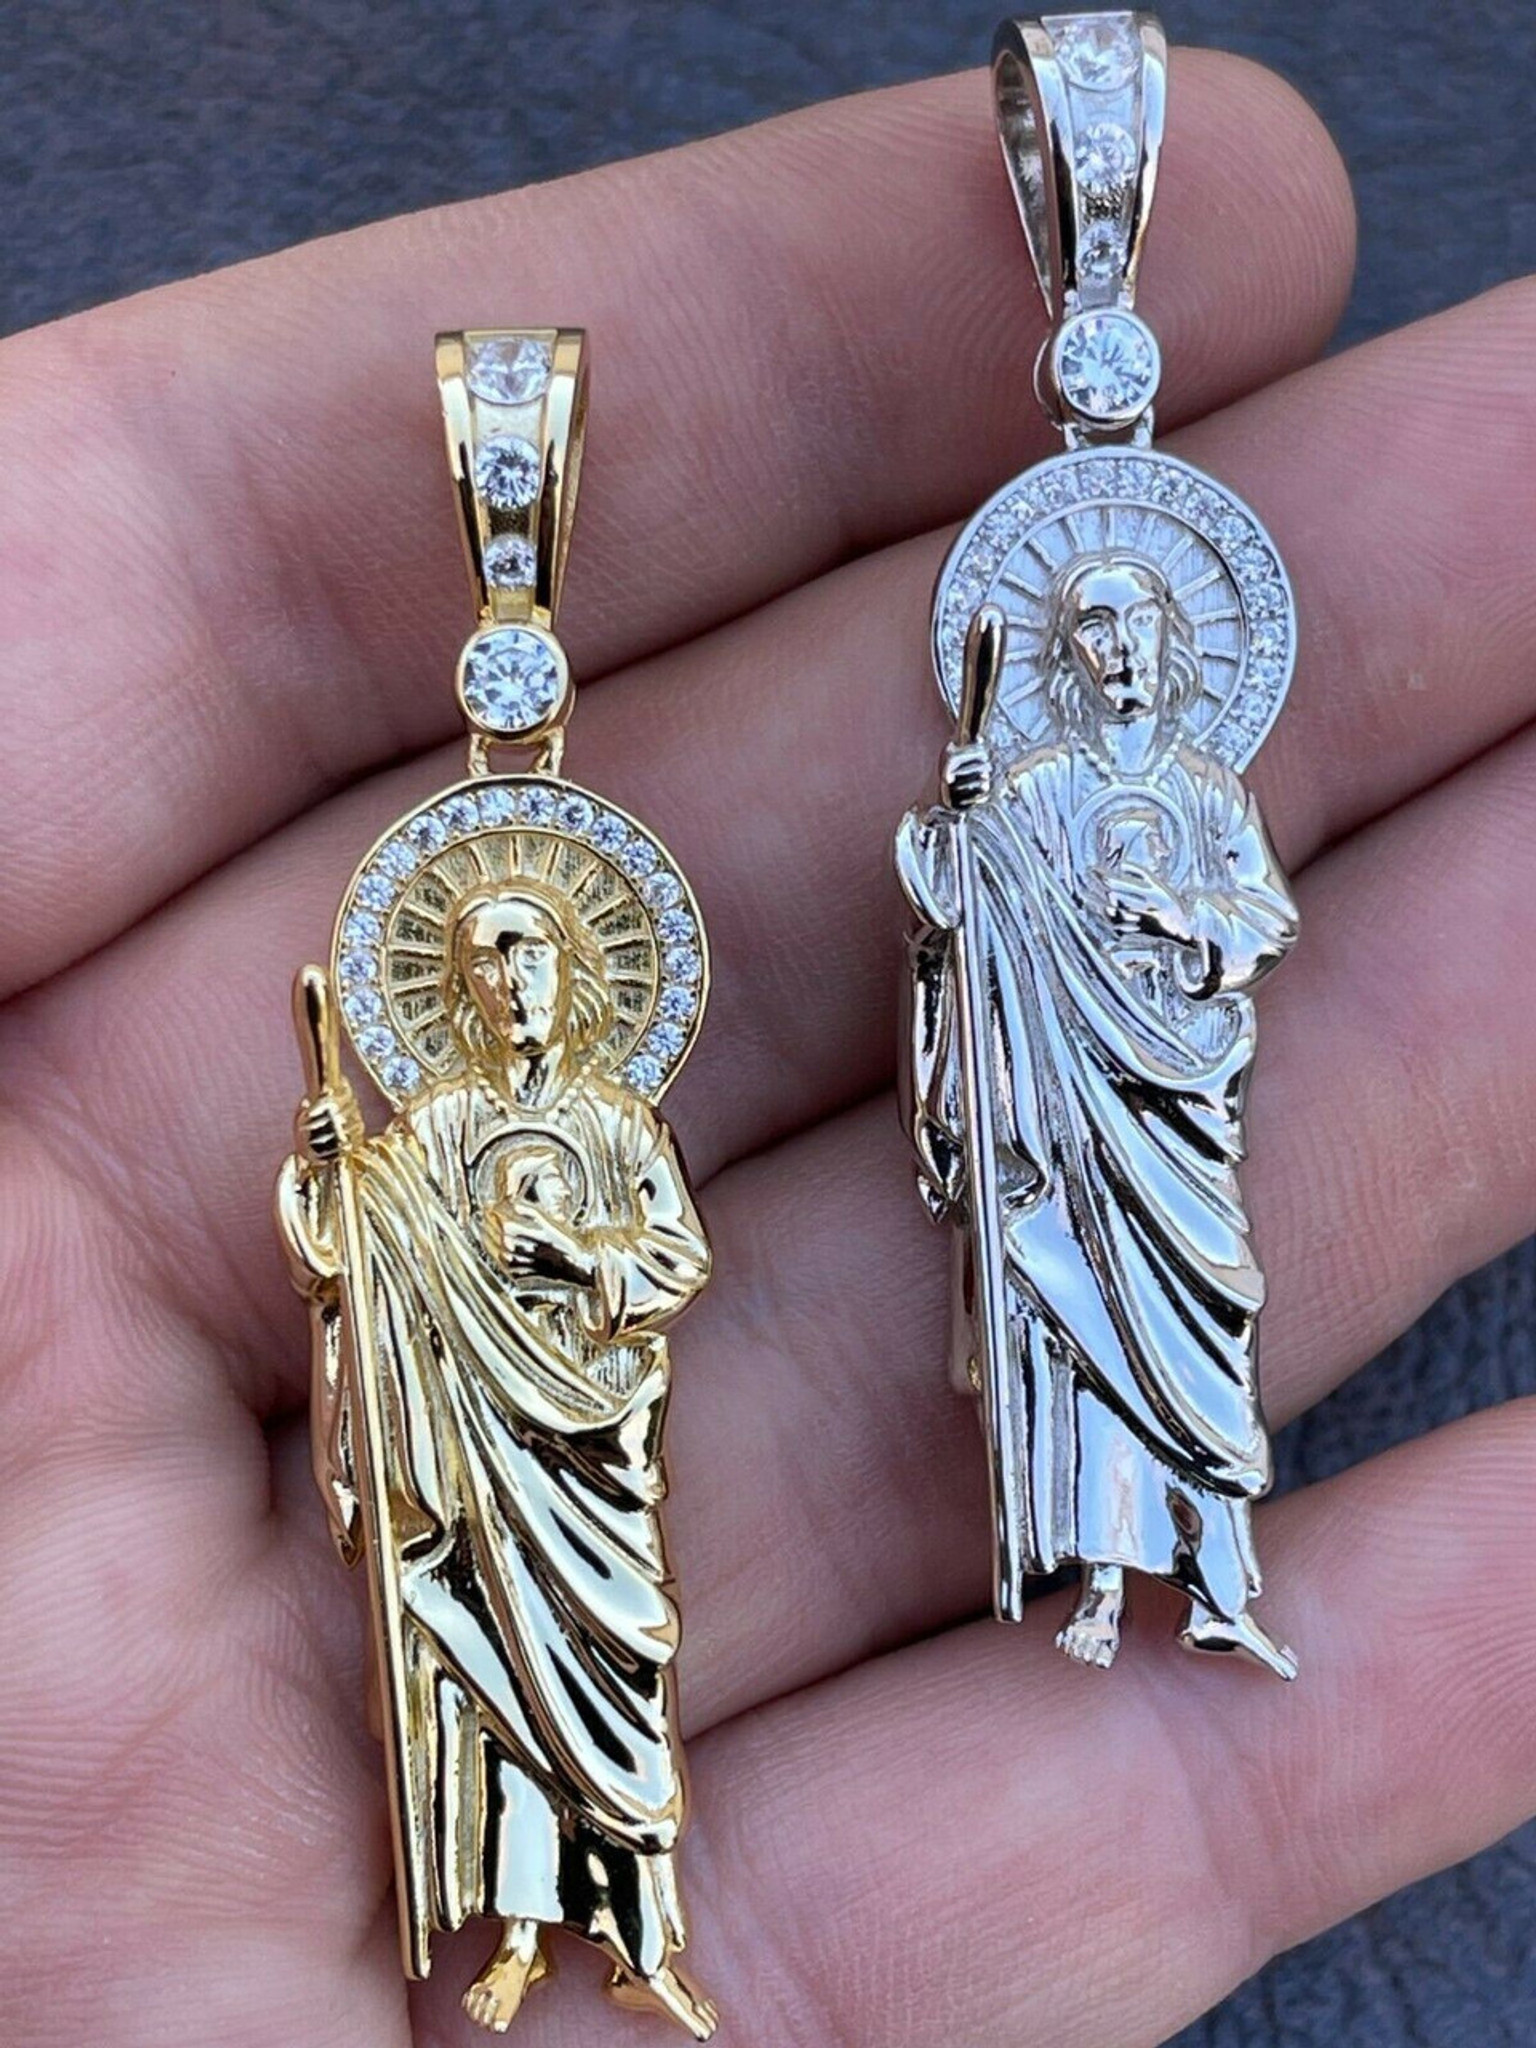 Gold And Silver San Judas Tadeo Palm Tree Pendant Catholic Keychain Statue  For Religious Church Decor And Souvenir Gift From Pedmg, $20.37 | DHgate.Com